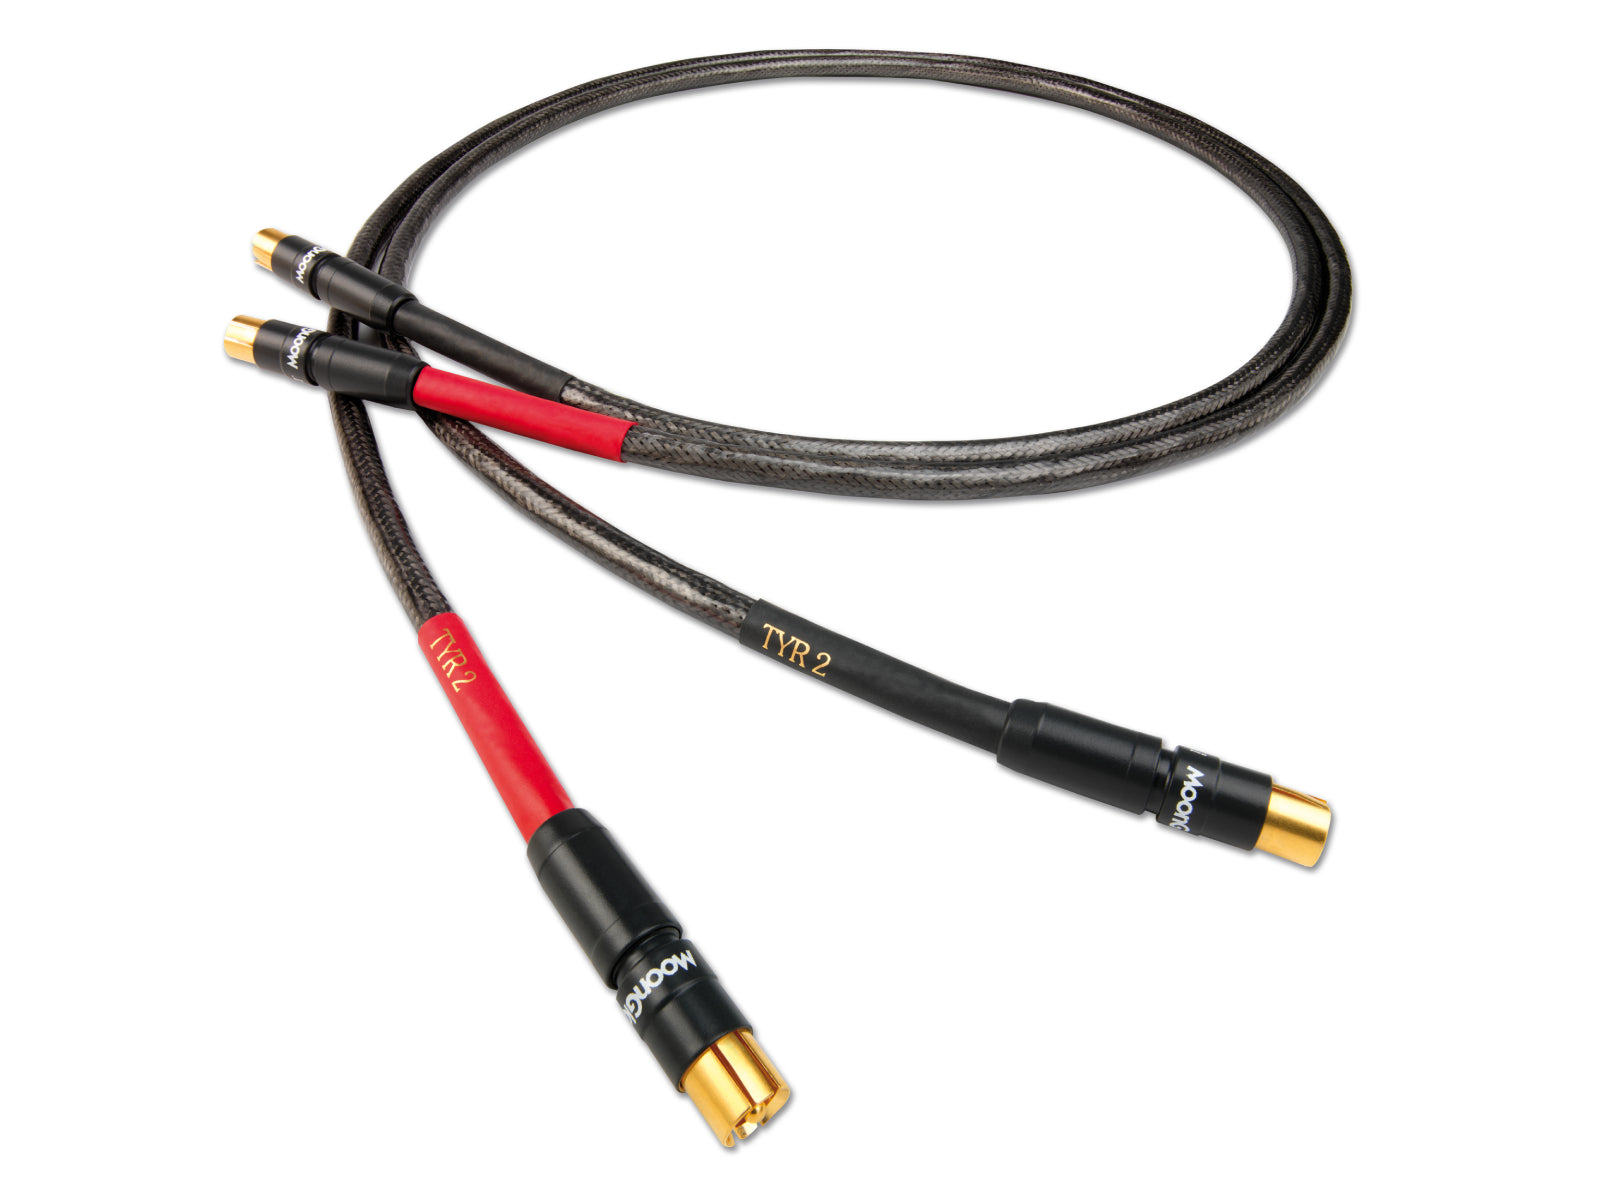 Nordost Tyr 2 RCA Analogue